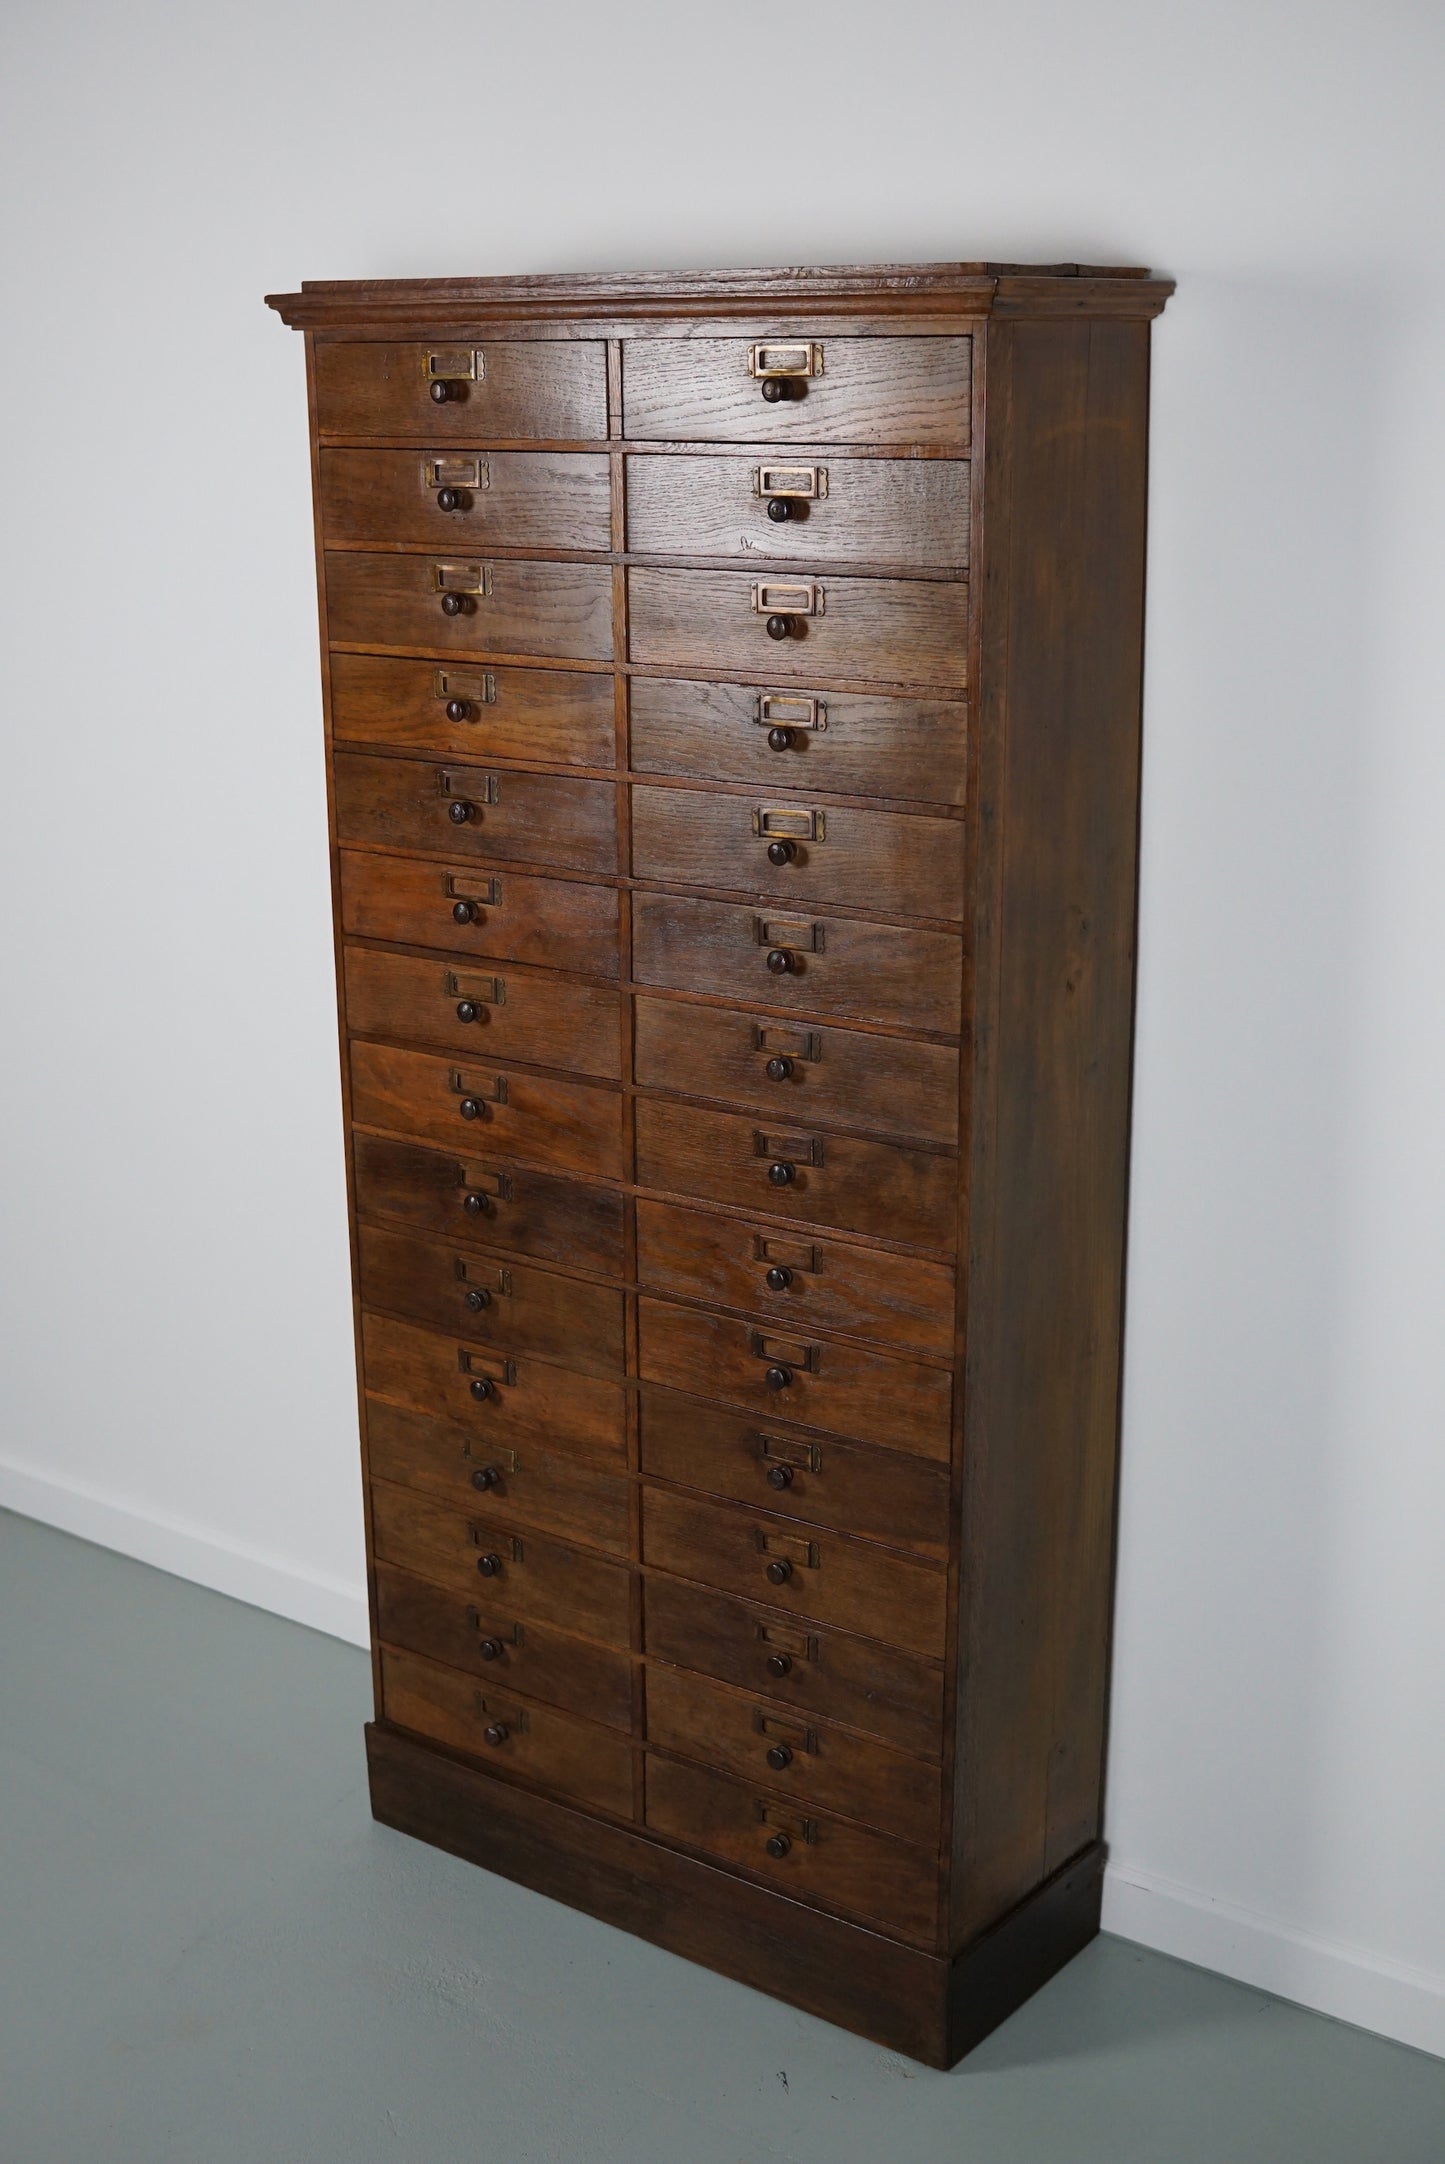 French Oak and Pine Jewelers / Watchmakers Cabinet, Early 20th Century